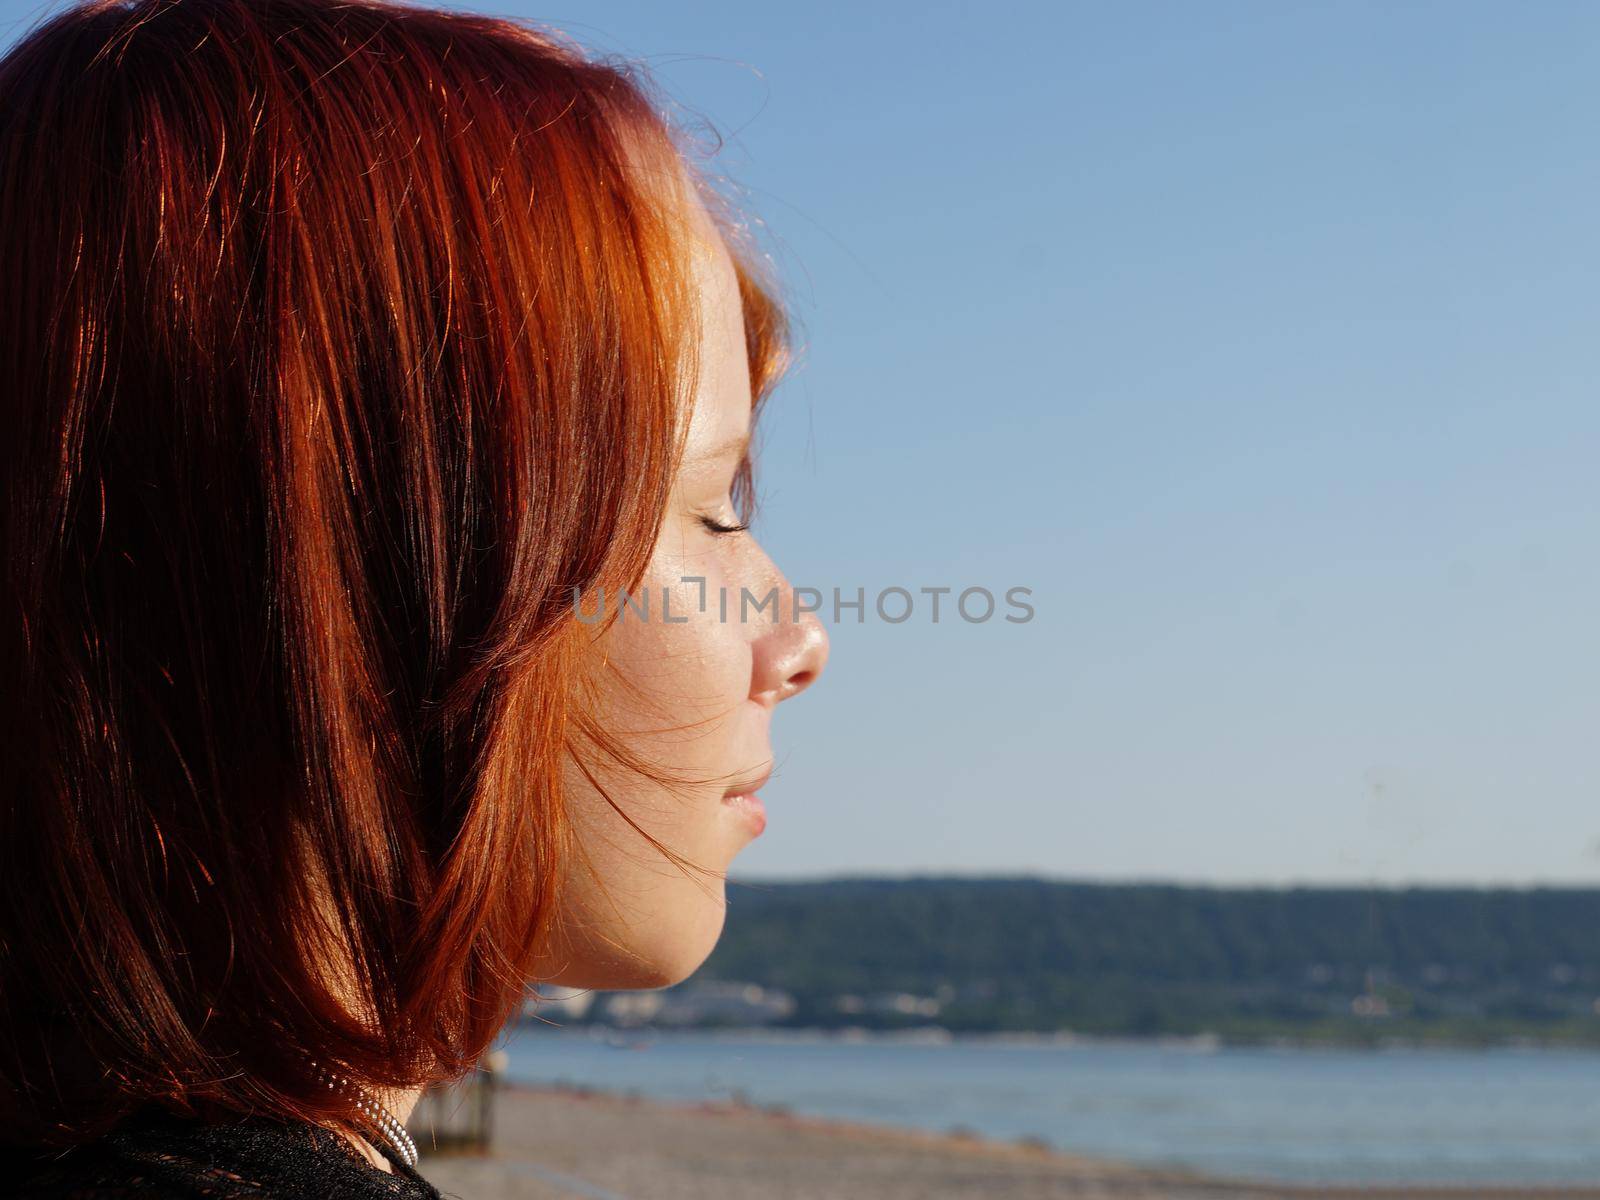 profile of a red-haired teenage girl with closed eyes close-up against the background of the sea, copy space by Annado